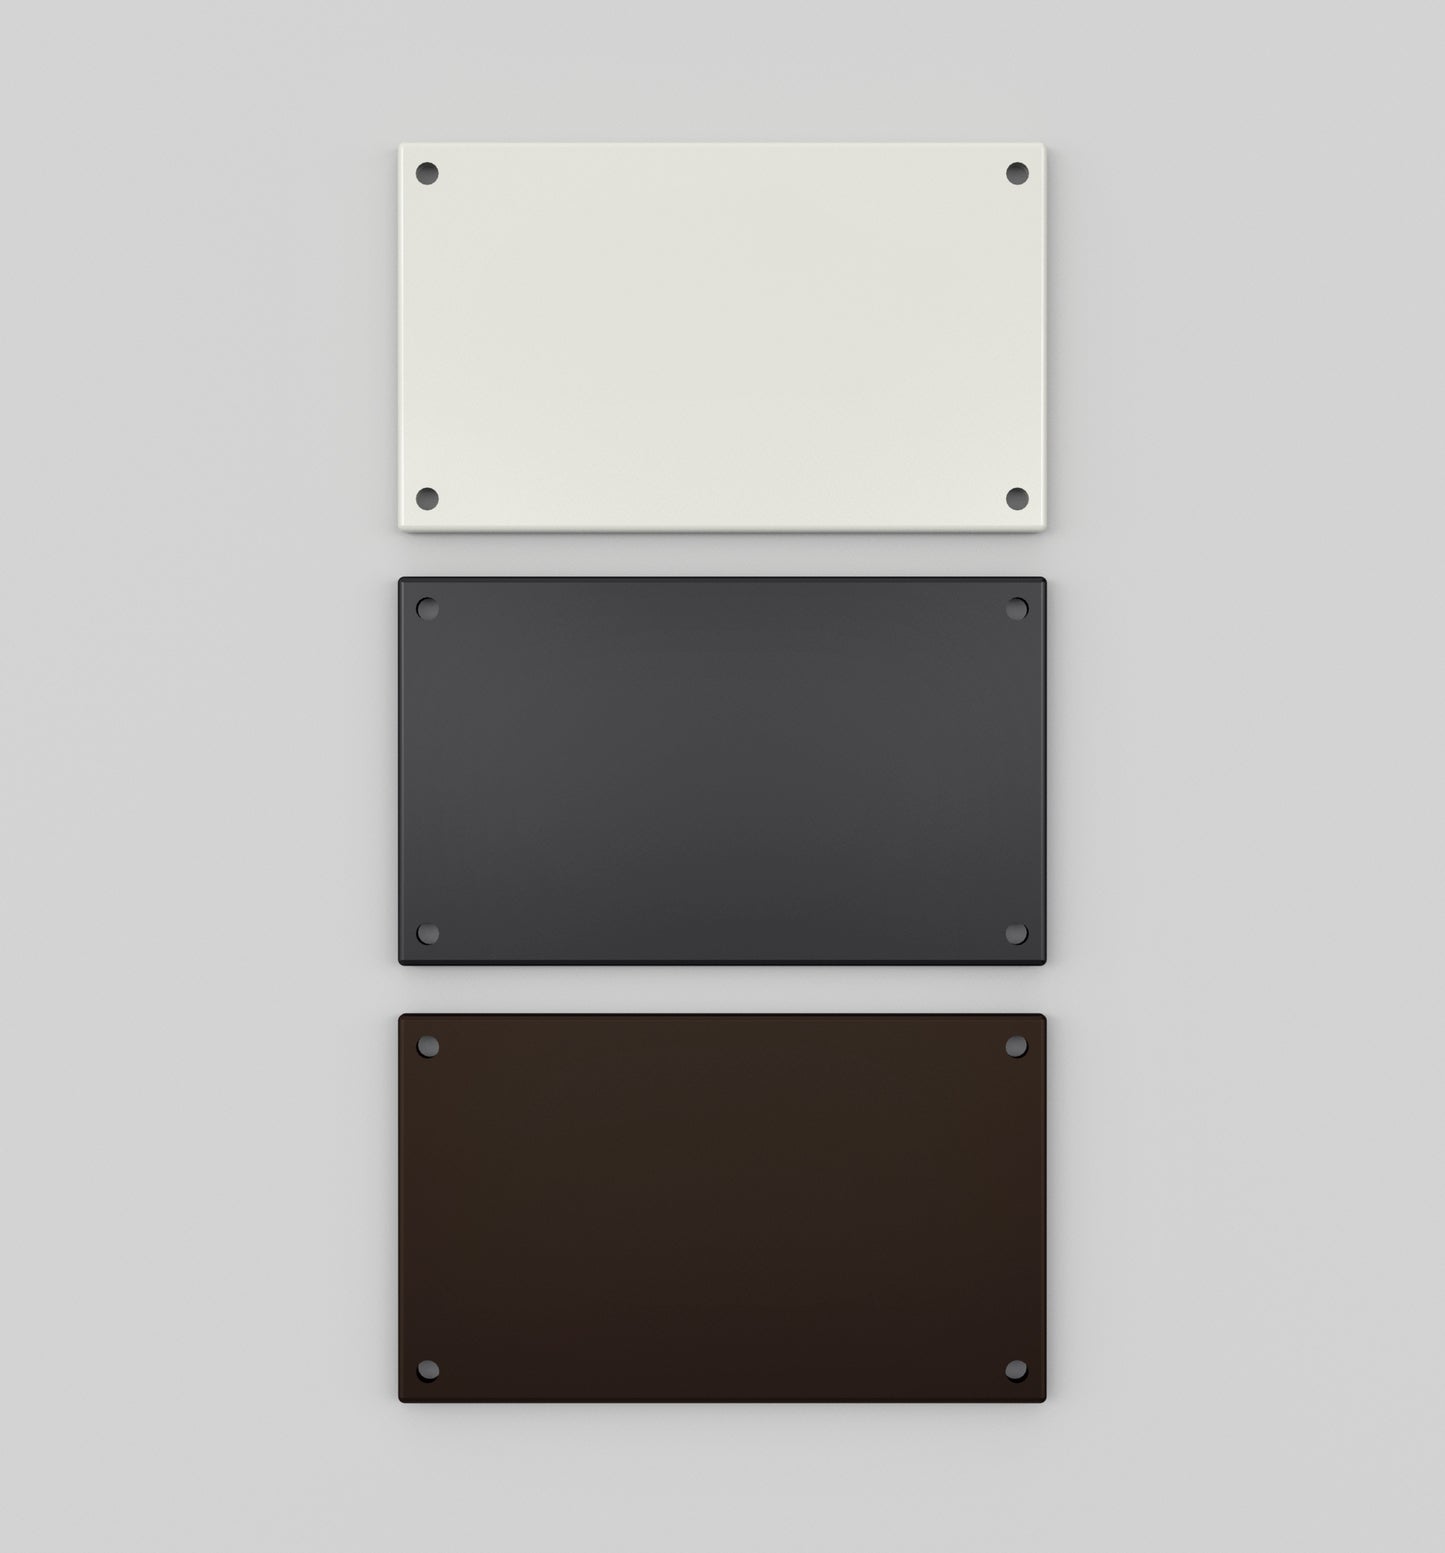 Horizontal Mounting Plate 7" Inch Size For Use With 7" Characters  (Bronze, Charcoal Grey, Off White)